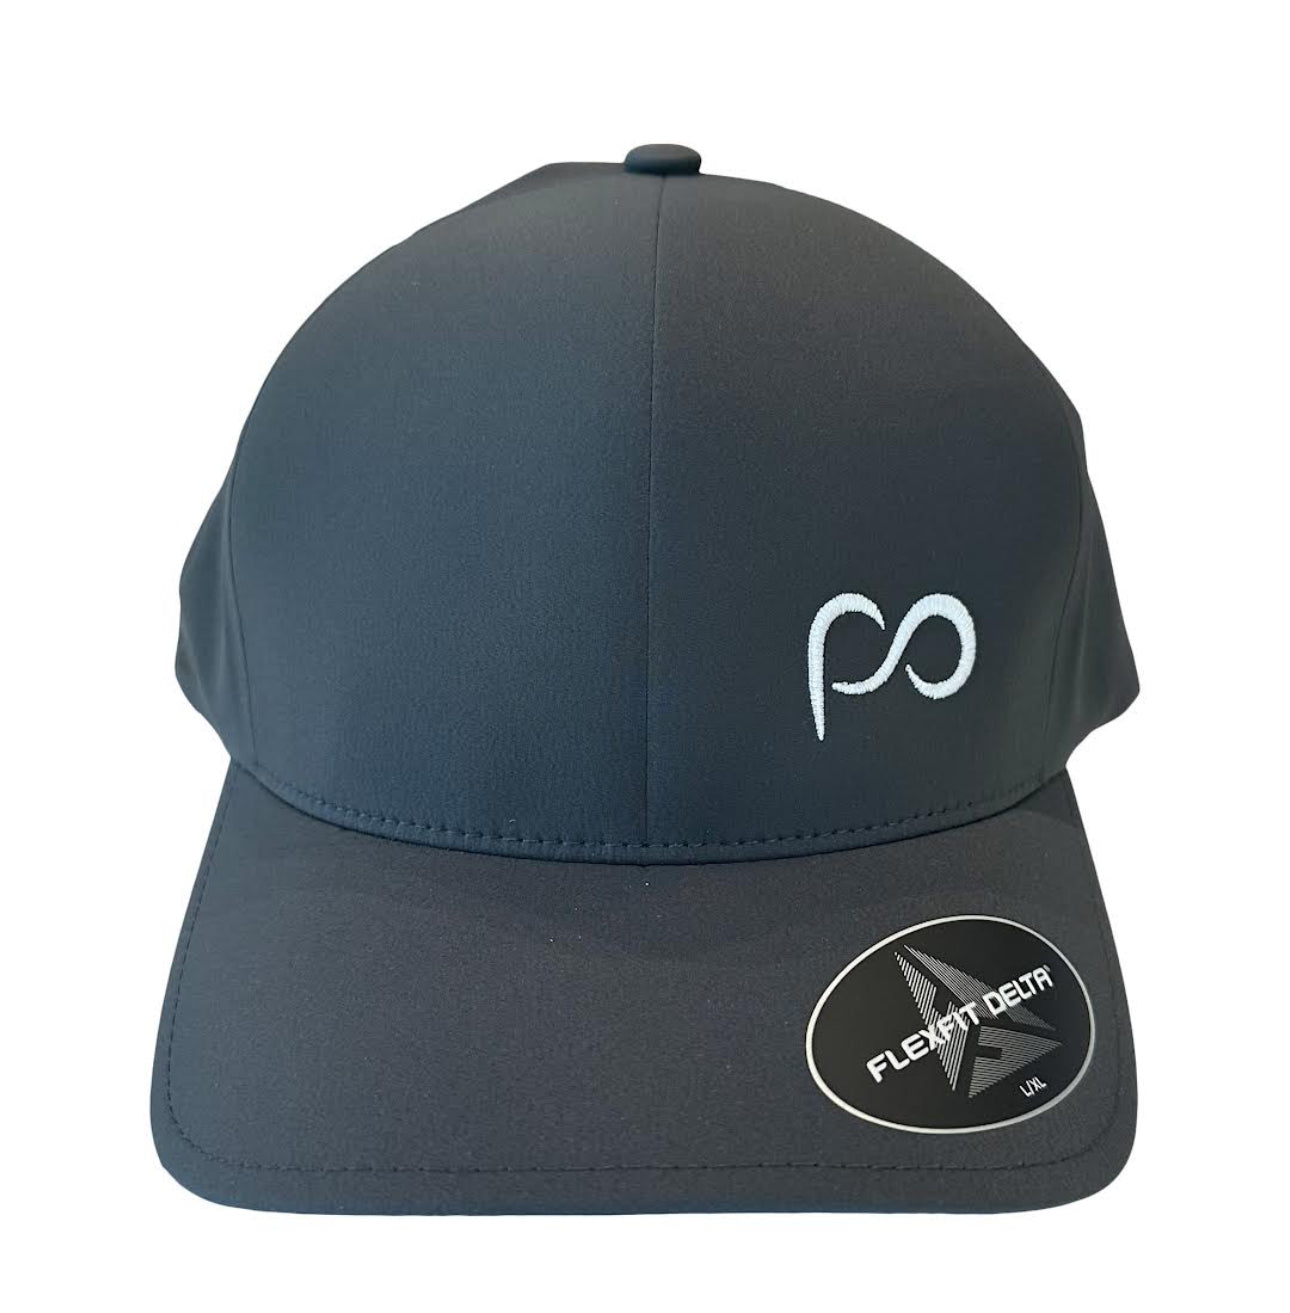 Grey Curved Bill Cap with White Small Front PO Logo